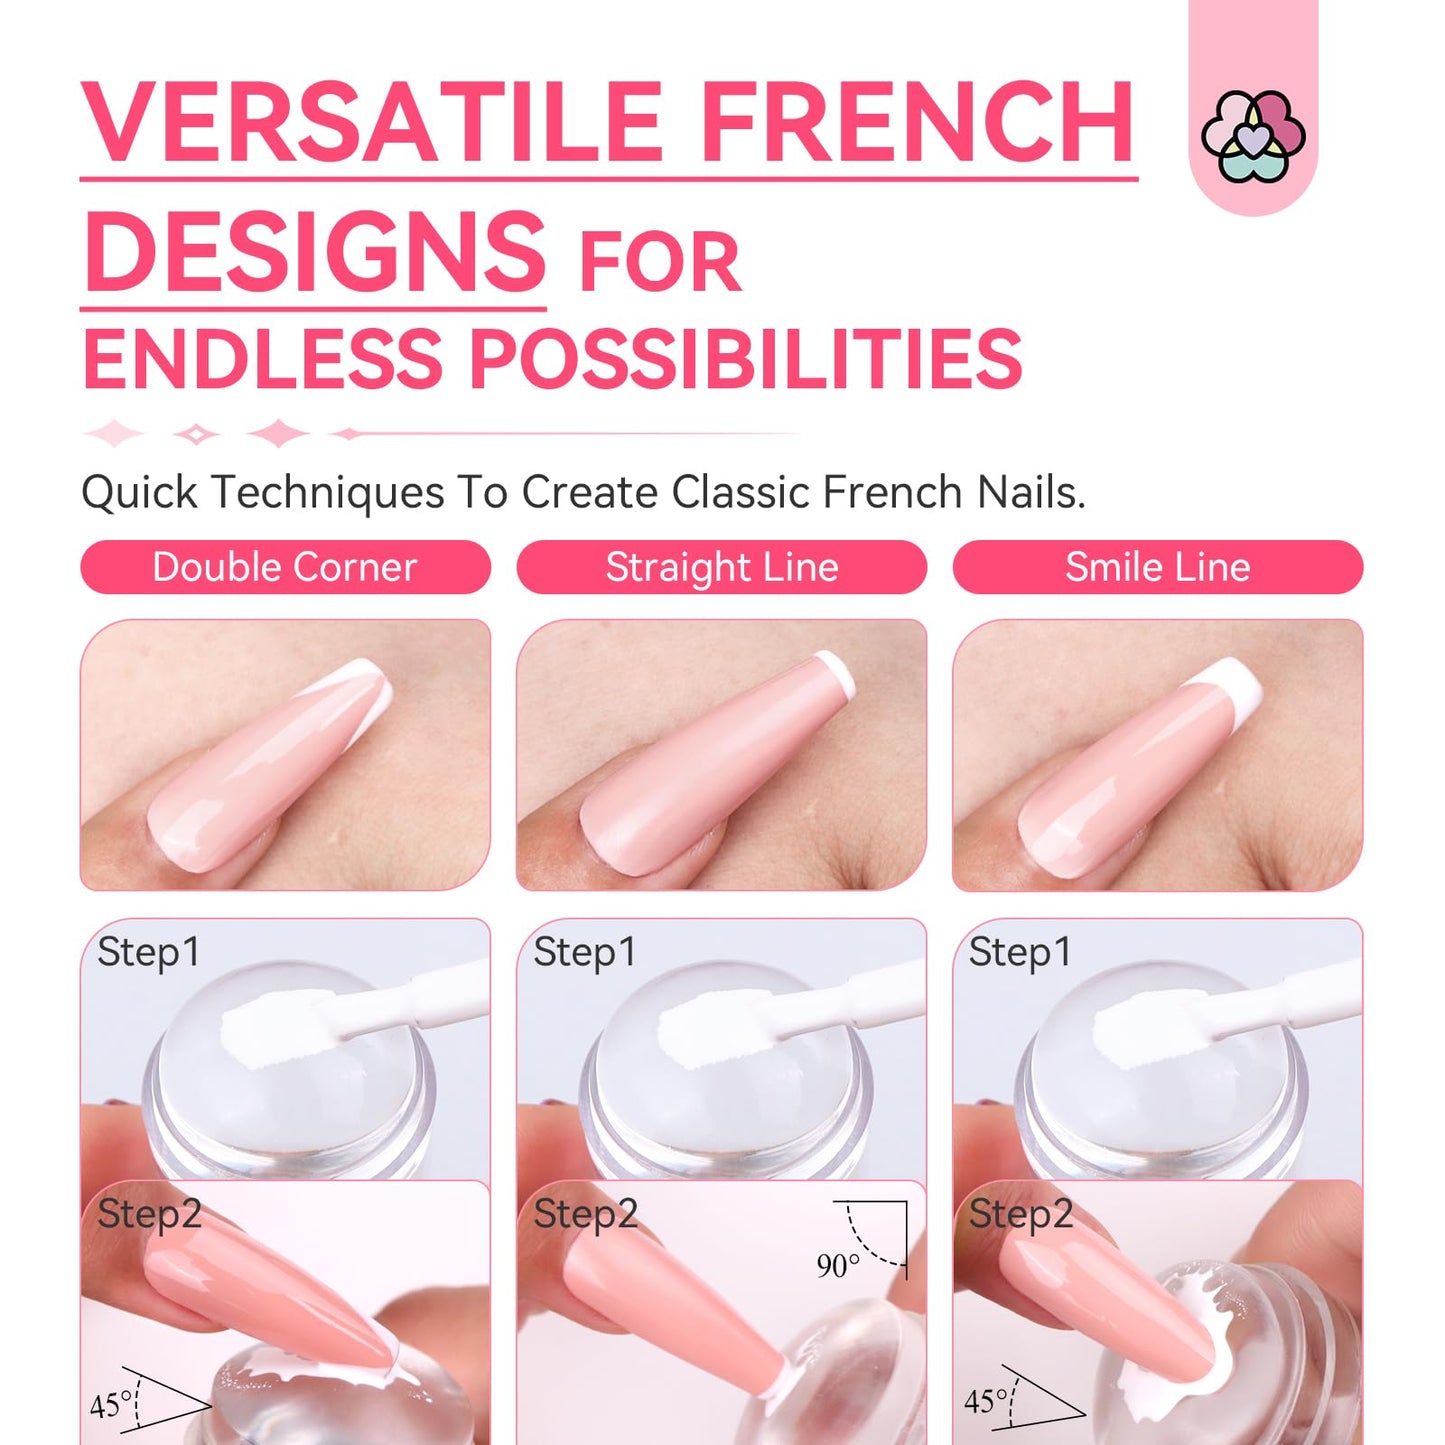 Saviland French Tip Nail Stamp - 4PCS Nail Art Stamper Kit Clear Silicone Nail Stamping Long & Short Jelly Stamper for Nails with Scrapers Nail Stamper Kit for French Manicure Home DIY Nail Art Salon